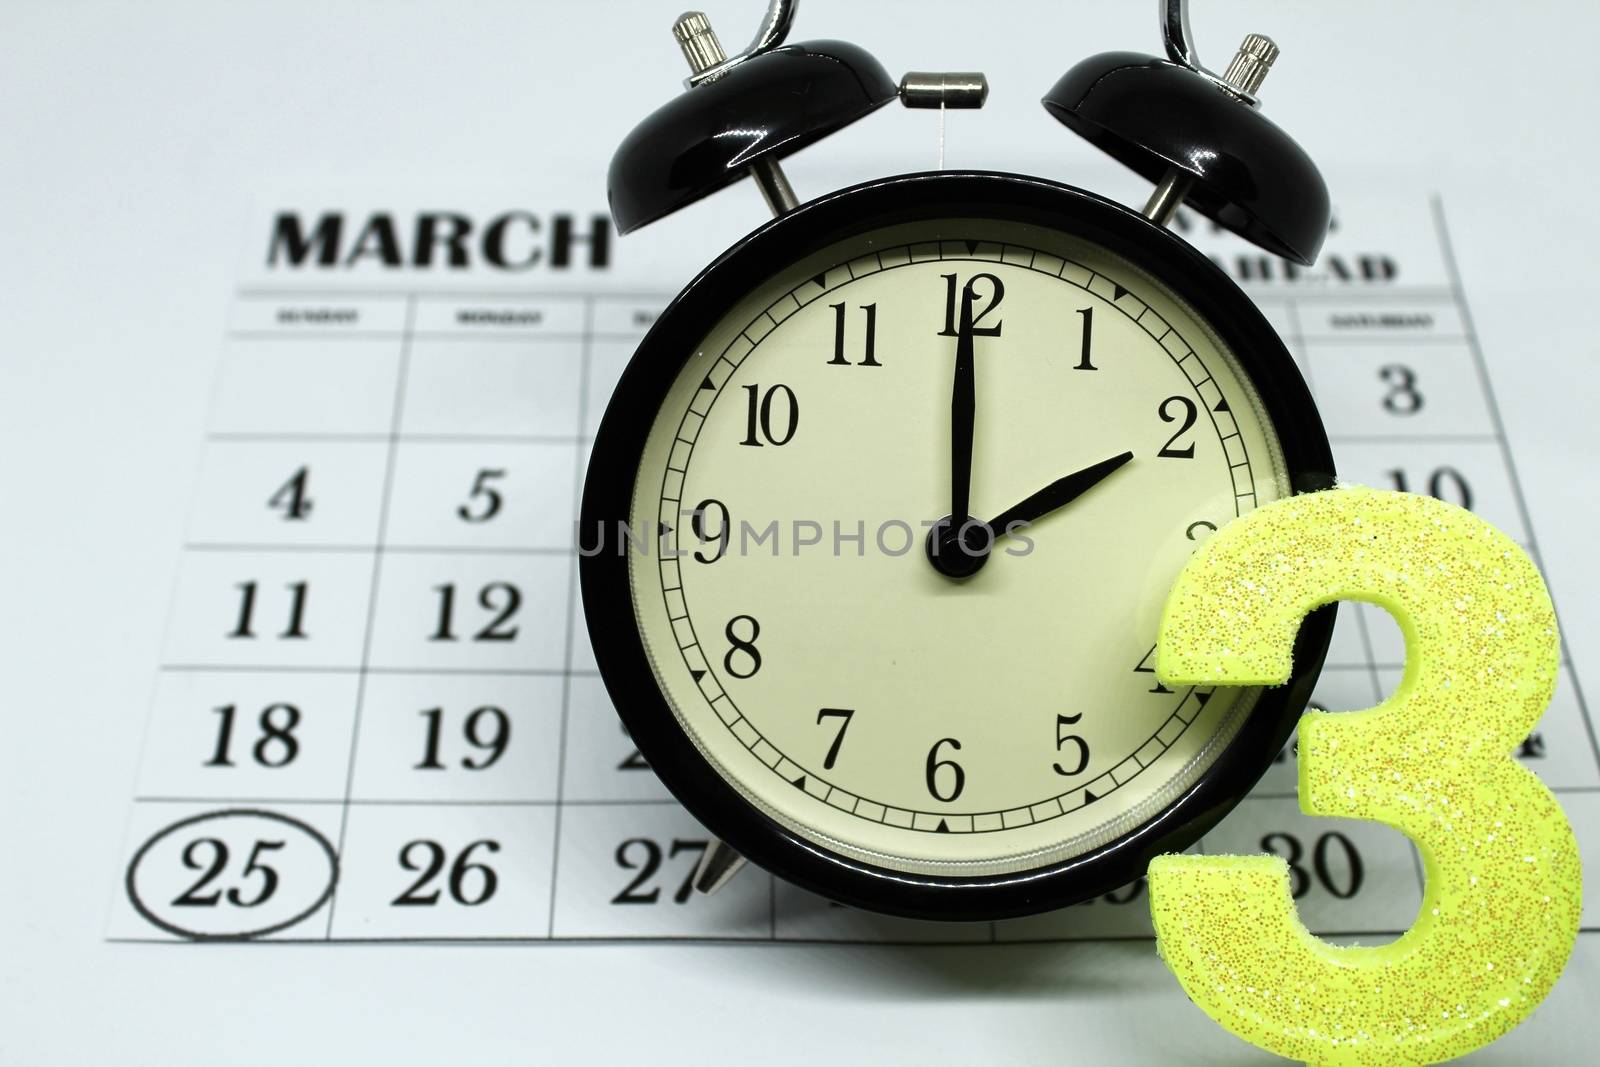 Daylight Savings Spring Forward sunday at 2:00 a.m. March 25 date indicated in the calendar.